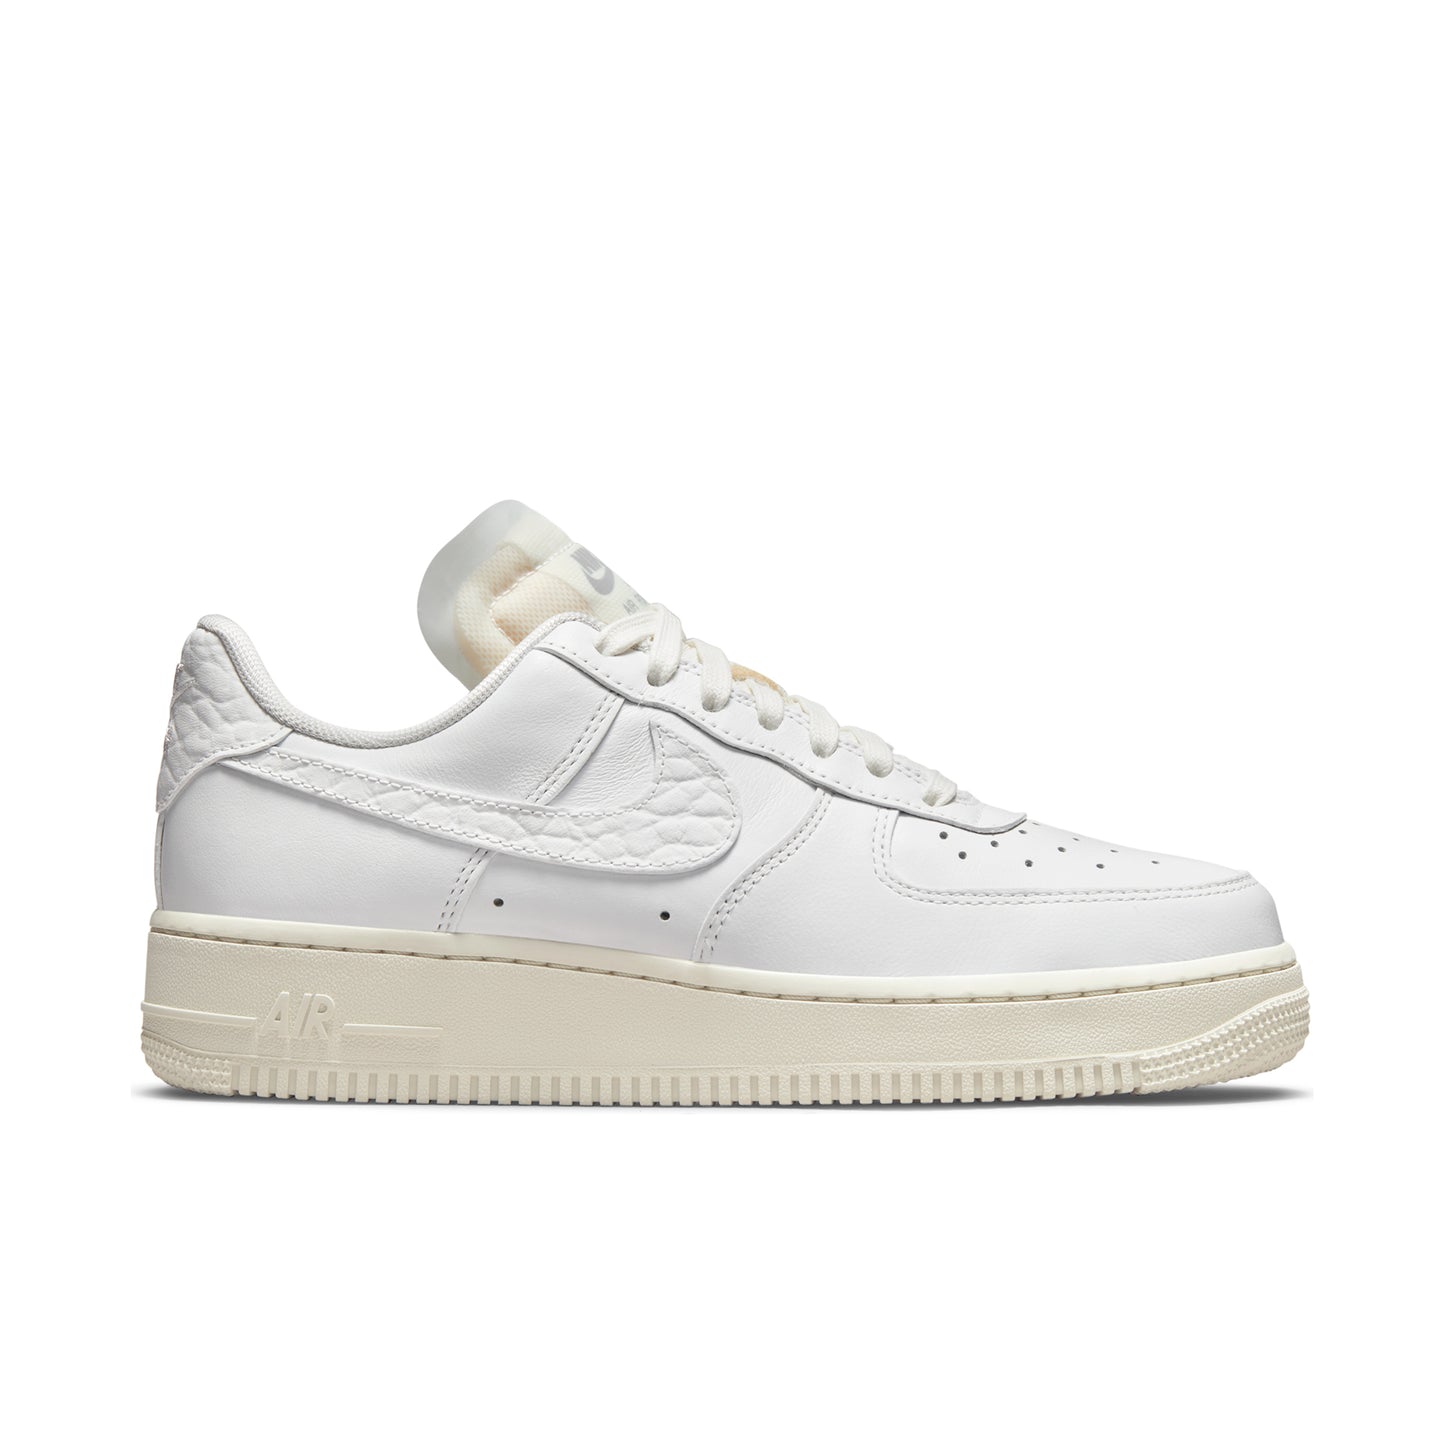 Nike Air Force 1 Low Prm Jewels White